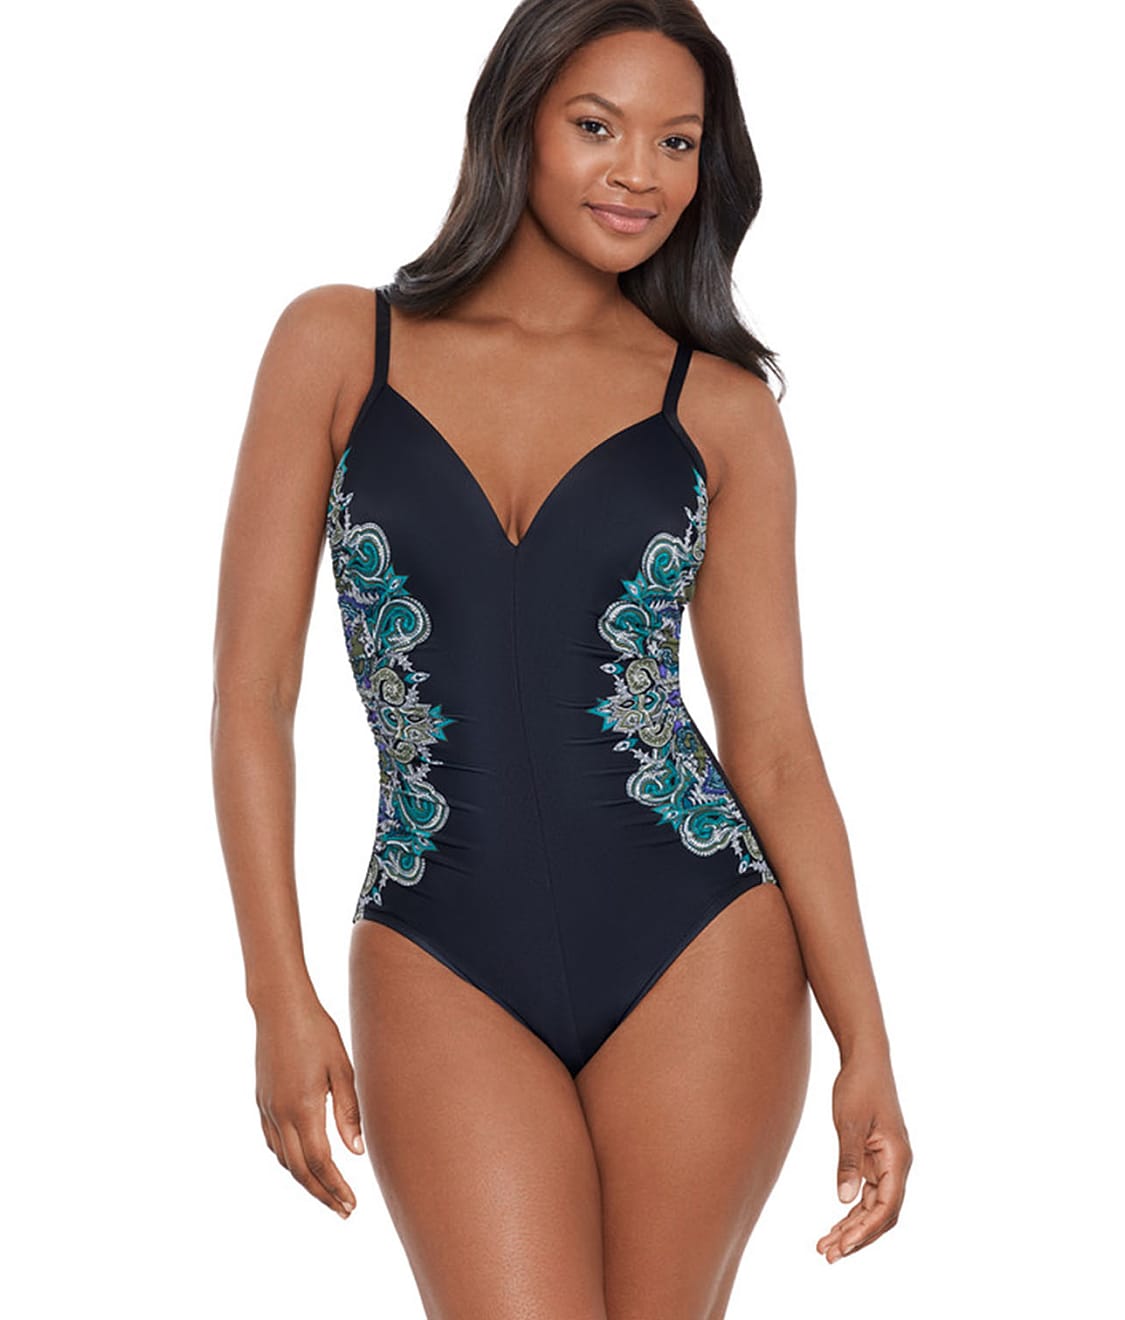 One Swimsuits Dd Cup Size